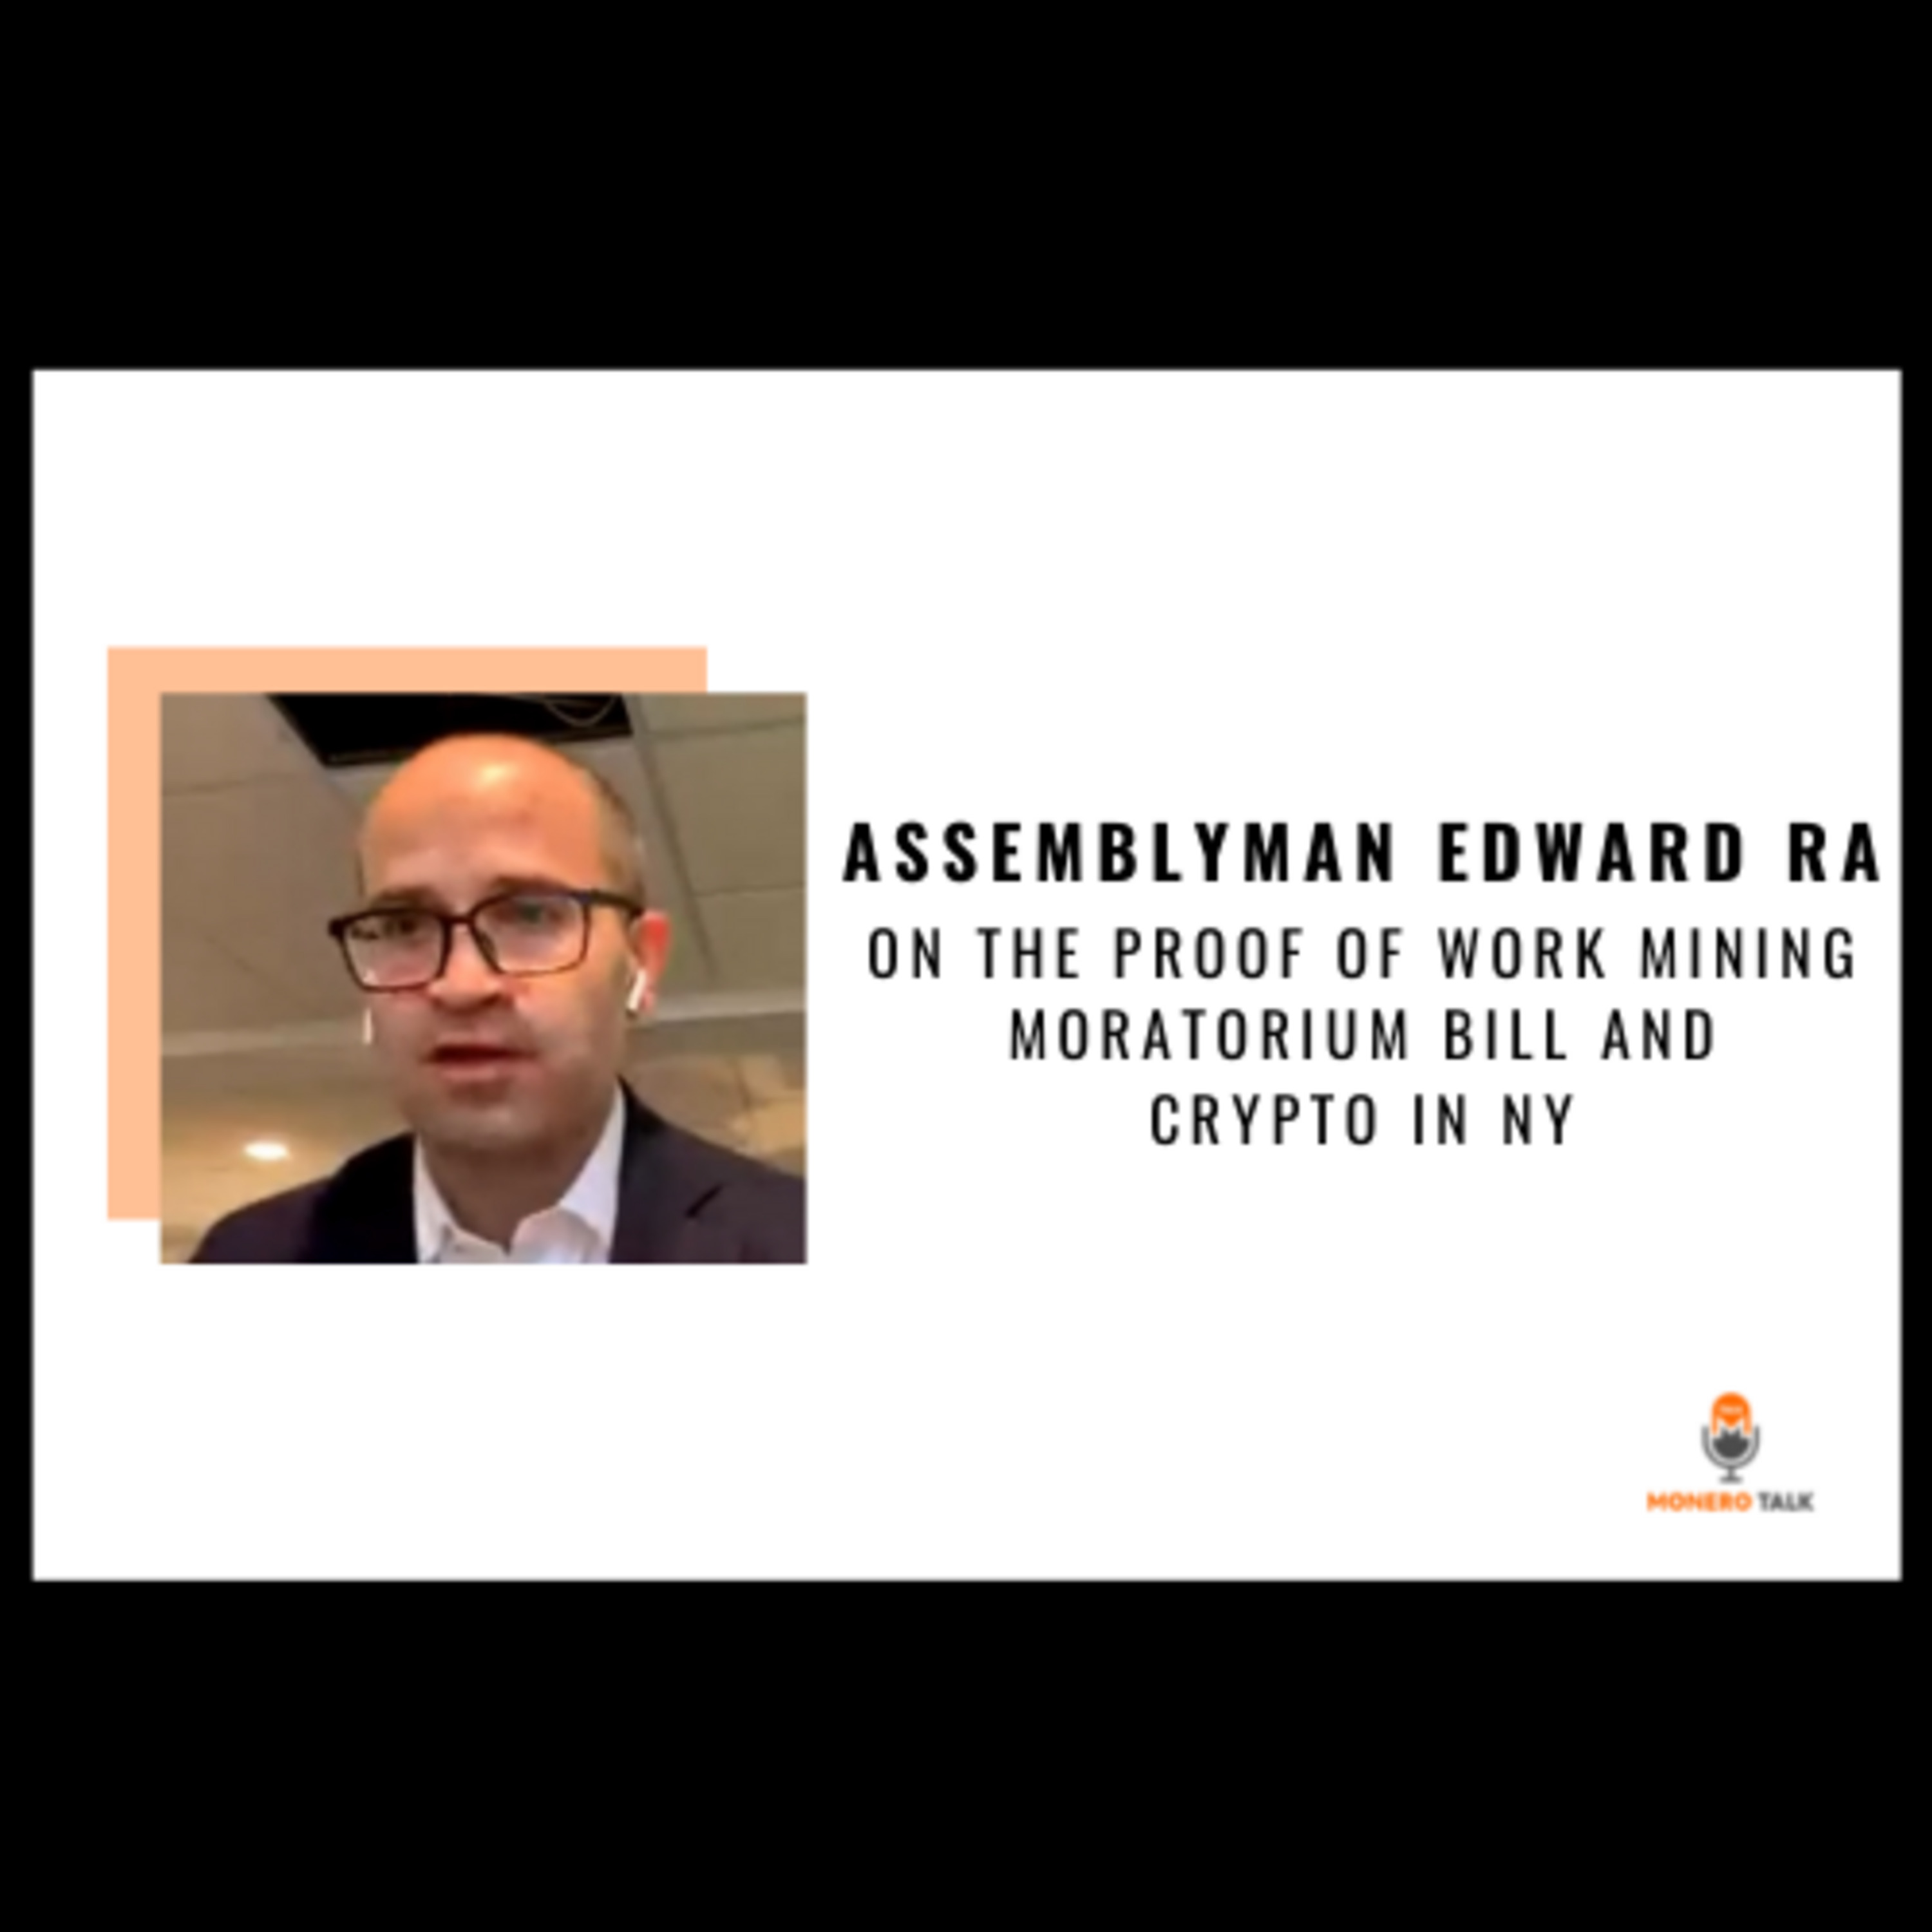 Assemblyman Edward RA on the Proof of Work Mining Moratorium Bill and Crypto in NY